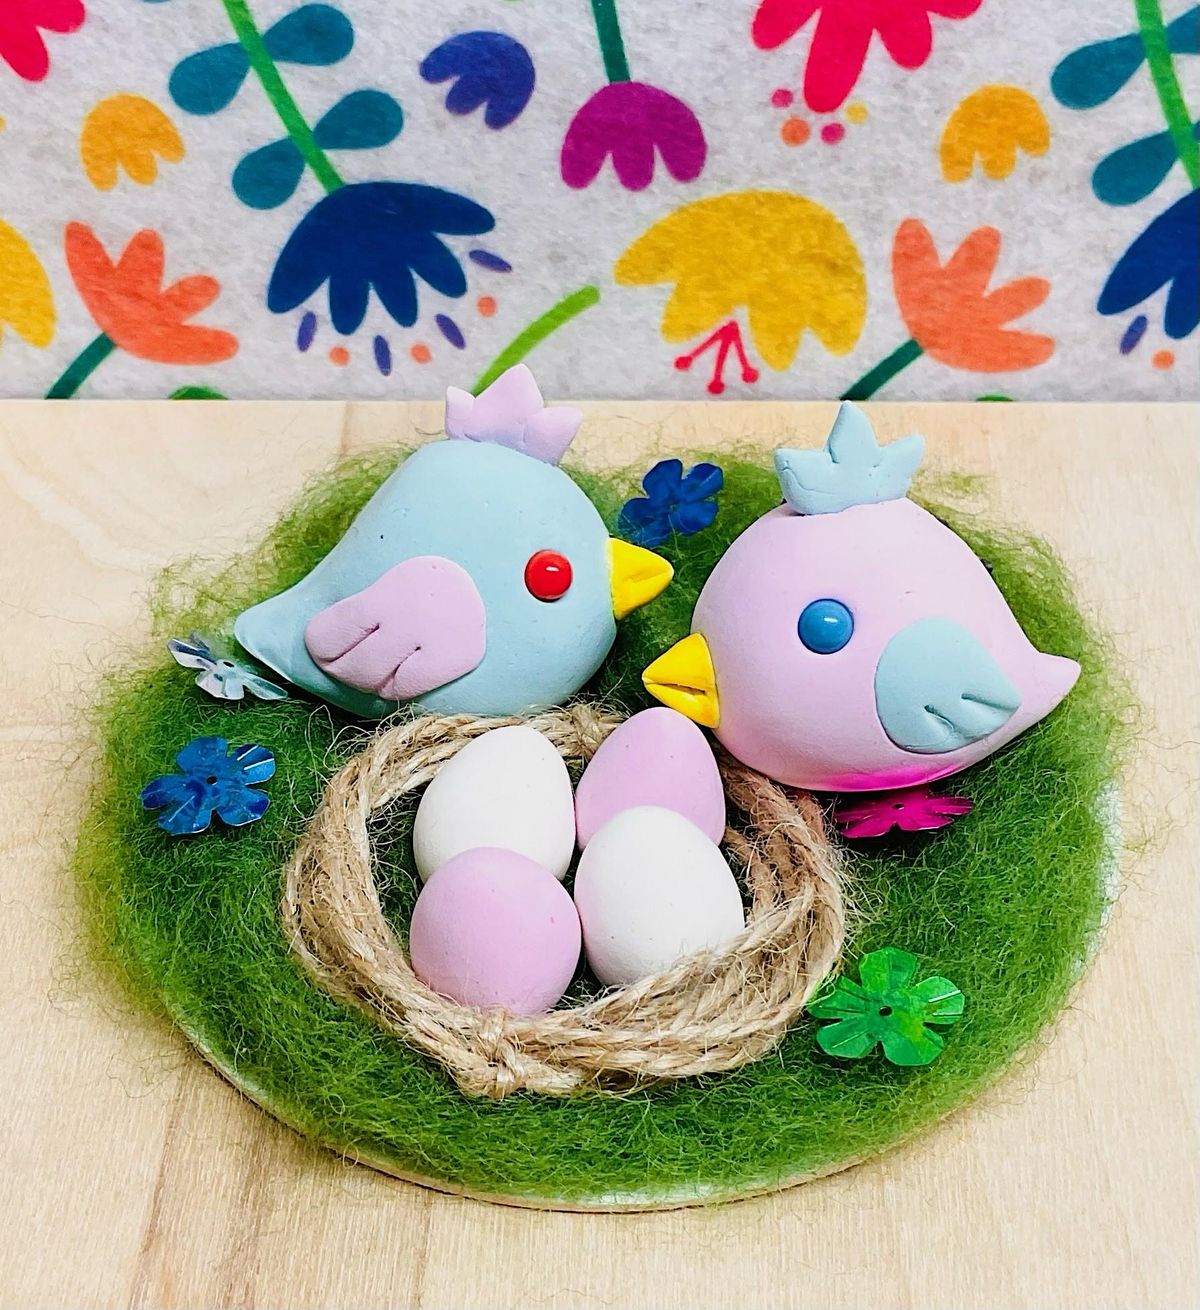 Get Crafty: Air Dry Clay Birds with Nest